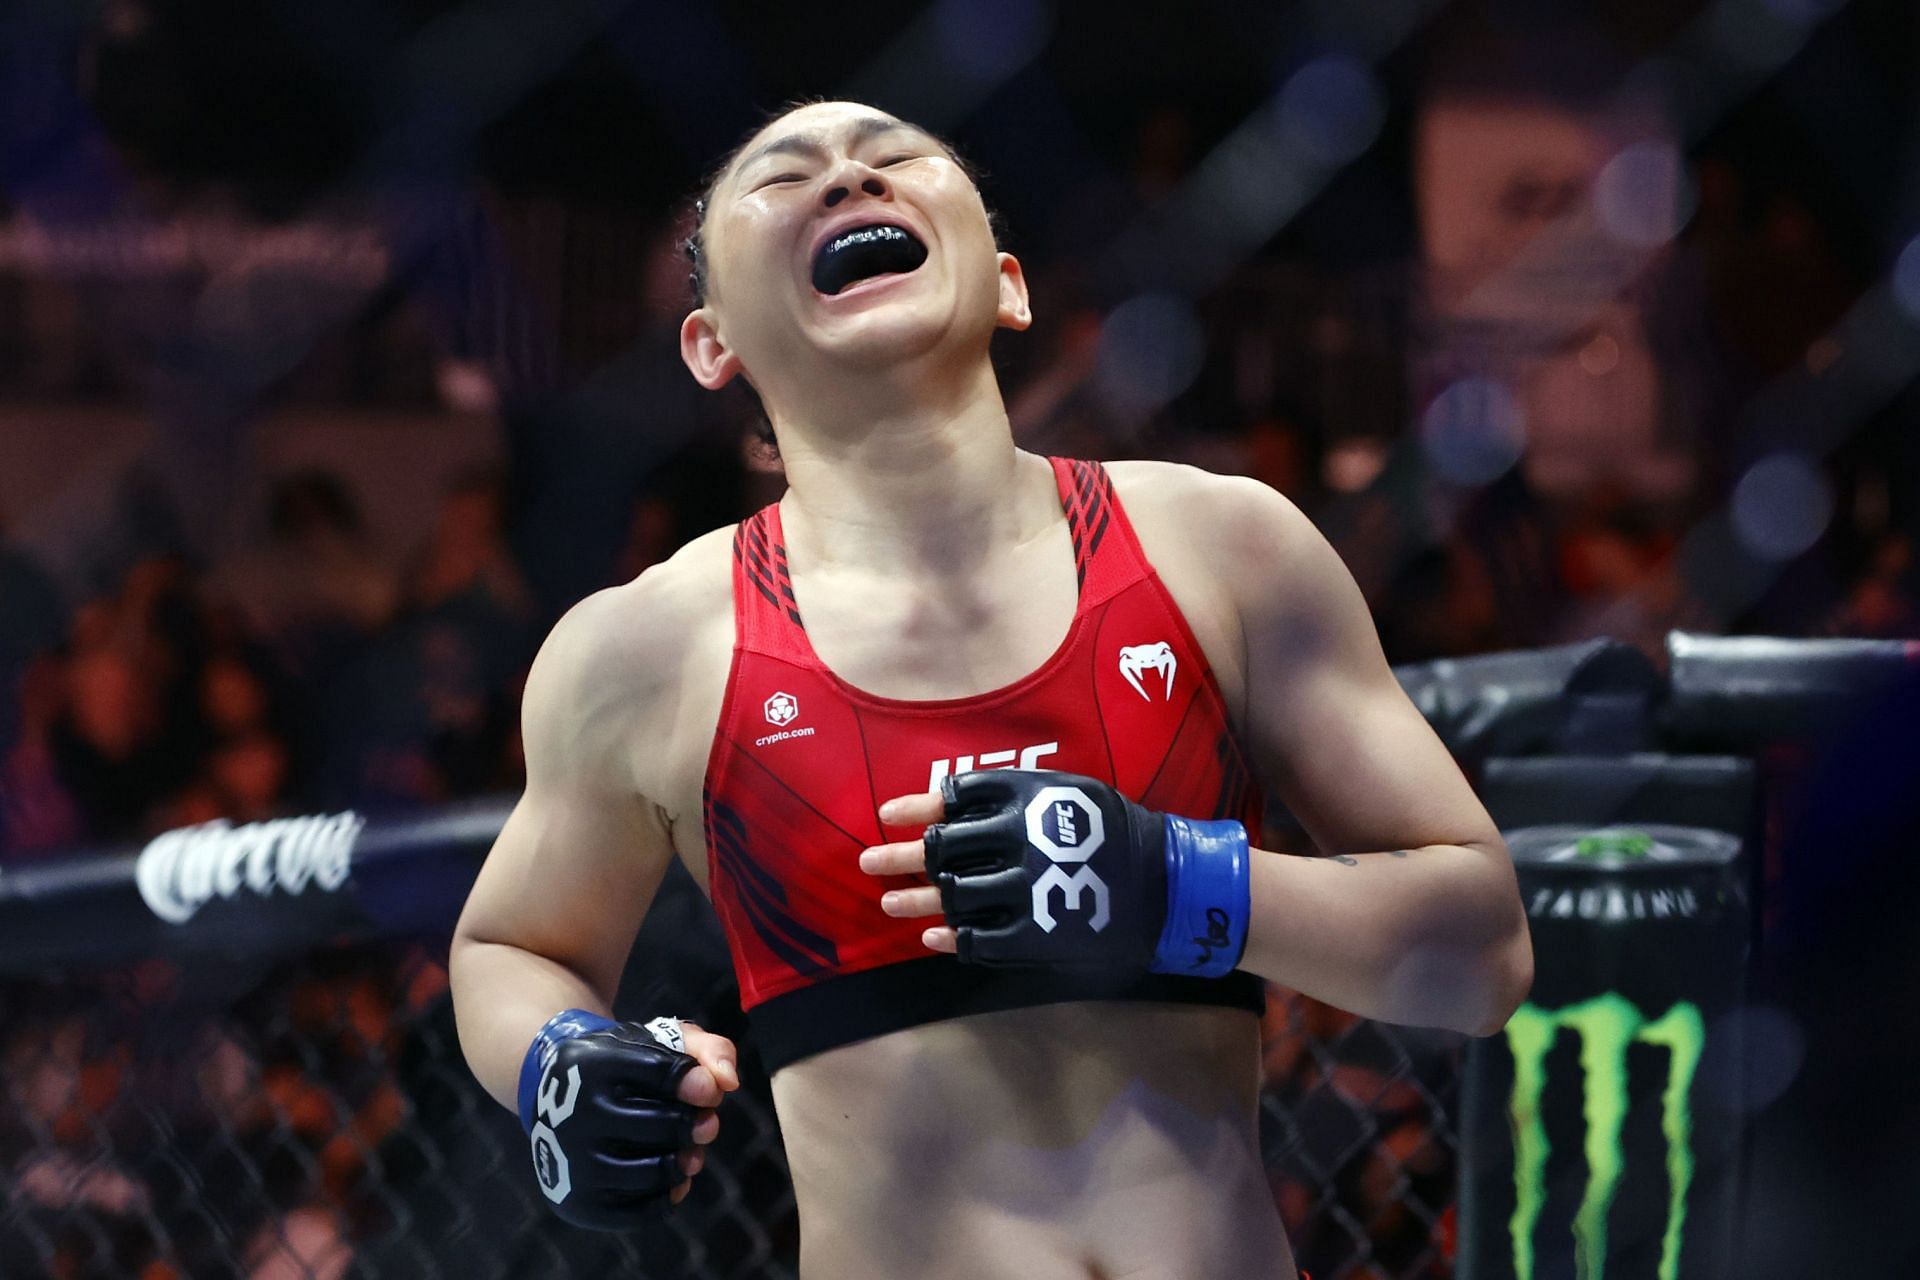 Yan Xiaonan is likely to receive a strawweight title shot after her win last night